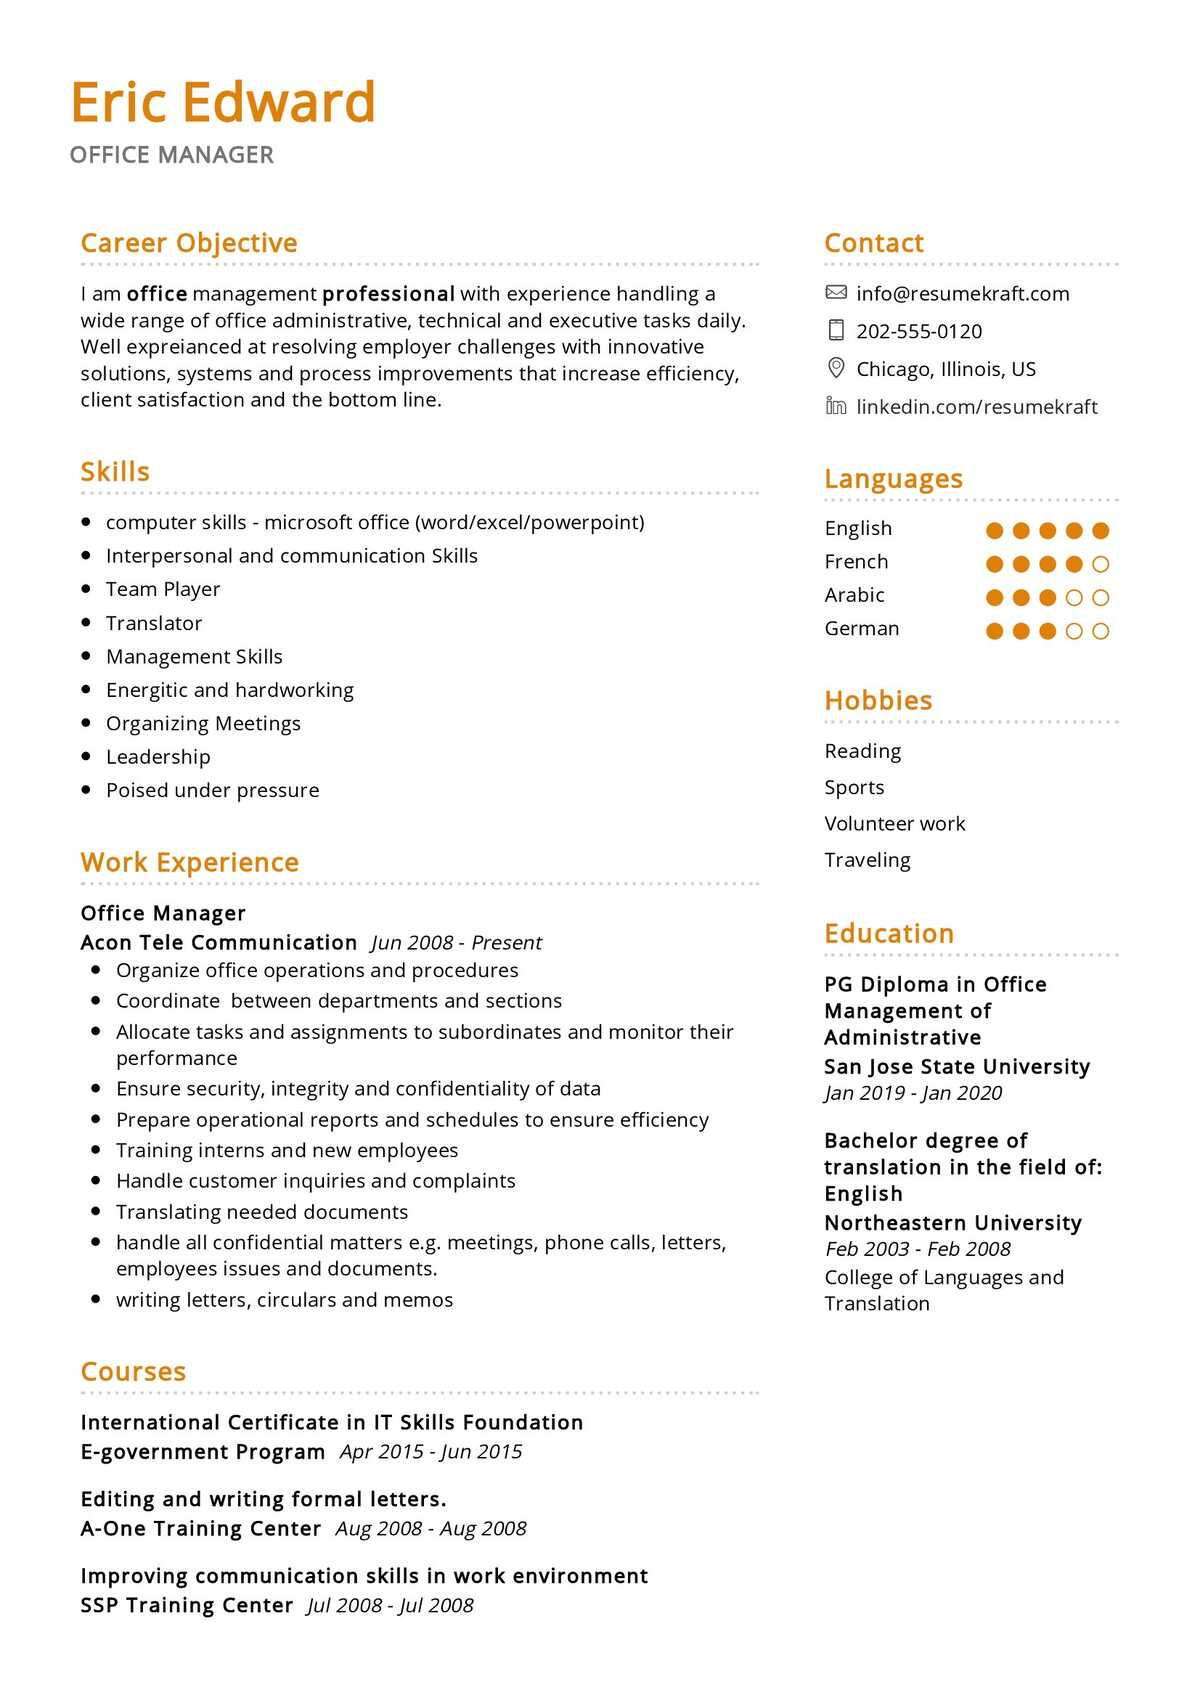 Resume Sample for An Experienced Office Manager Office Manager Resume Sample 2022 Writing Tips – Resumekraft